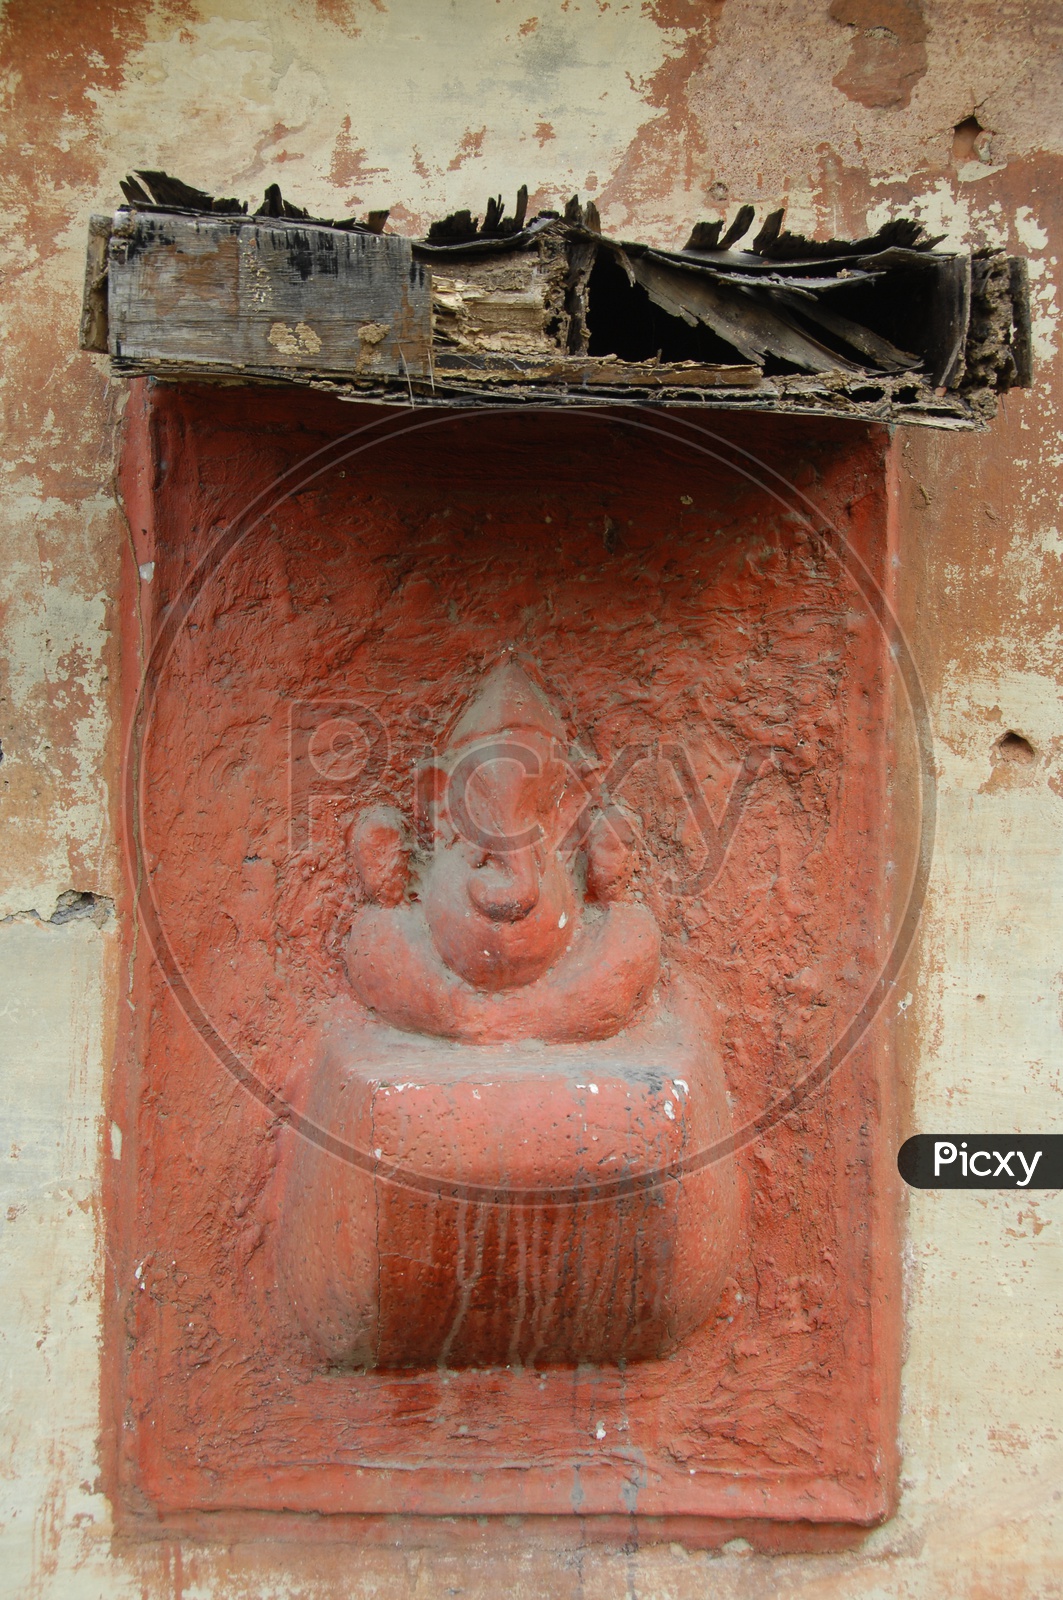 Lord Ganesh idol attached to wall